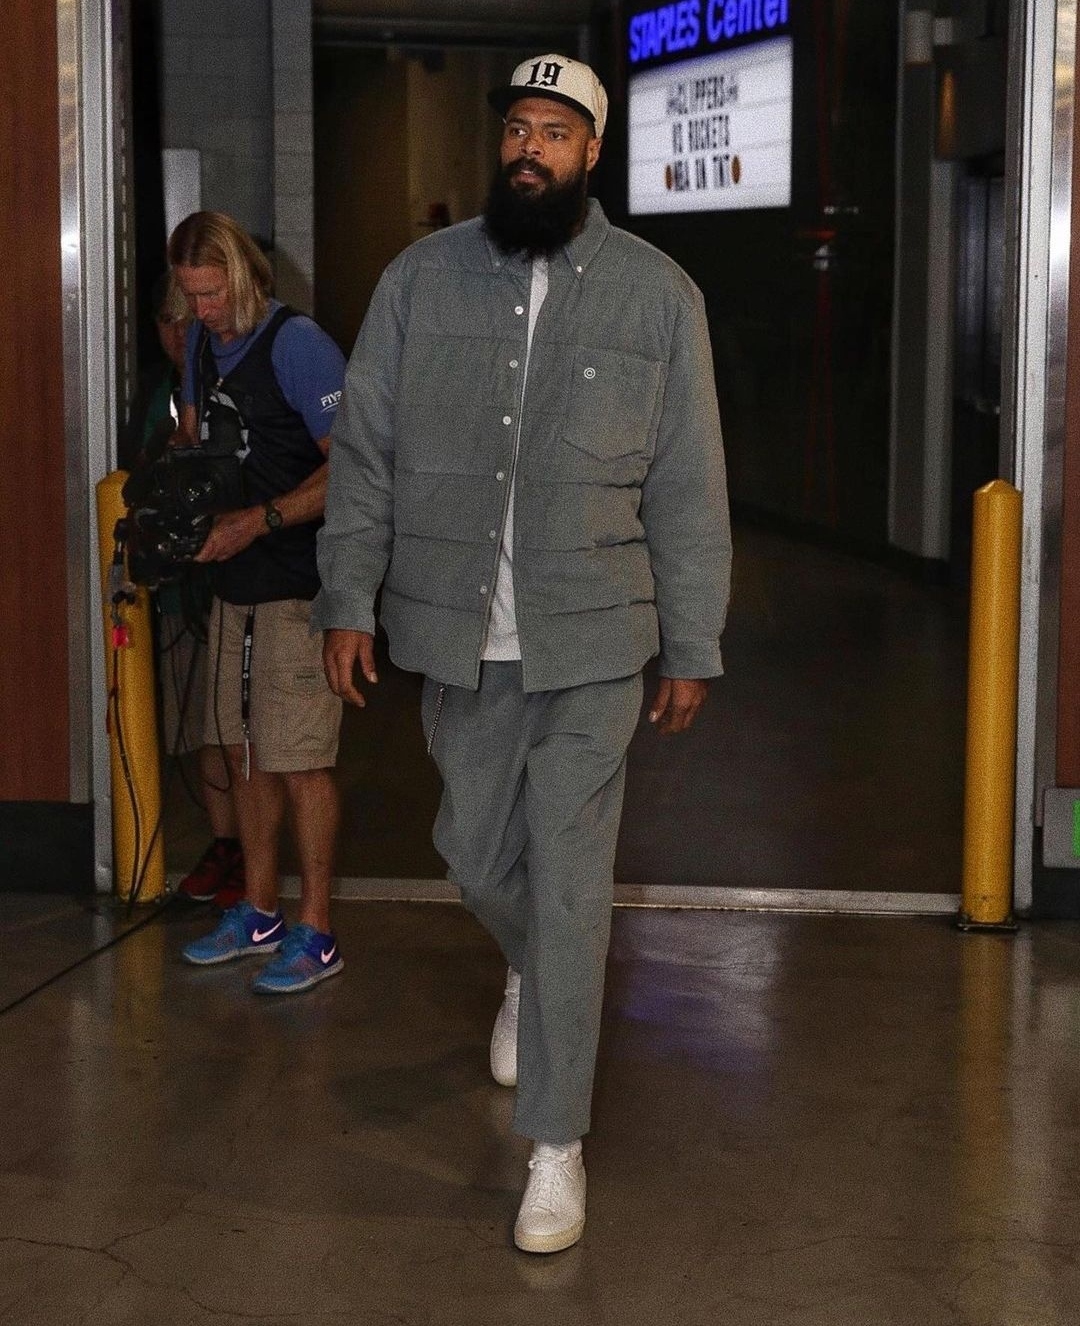 Tyson Chandler is currently a coach